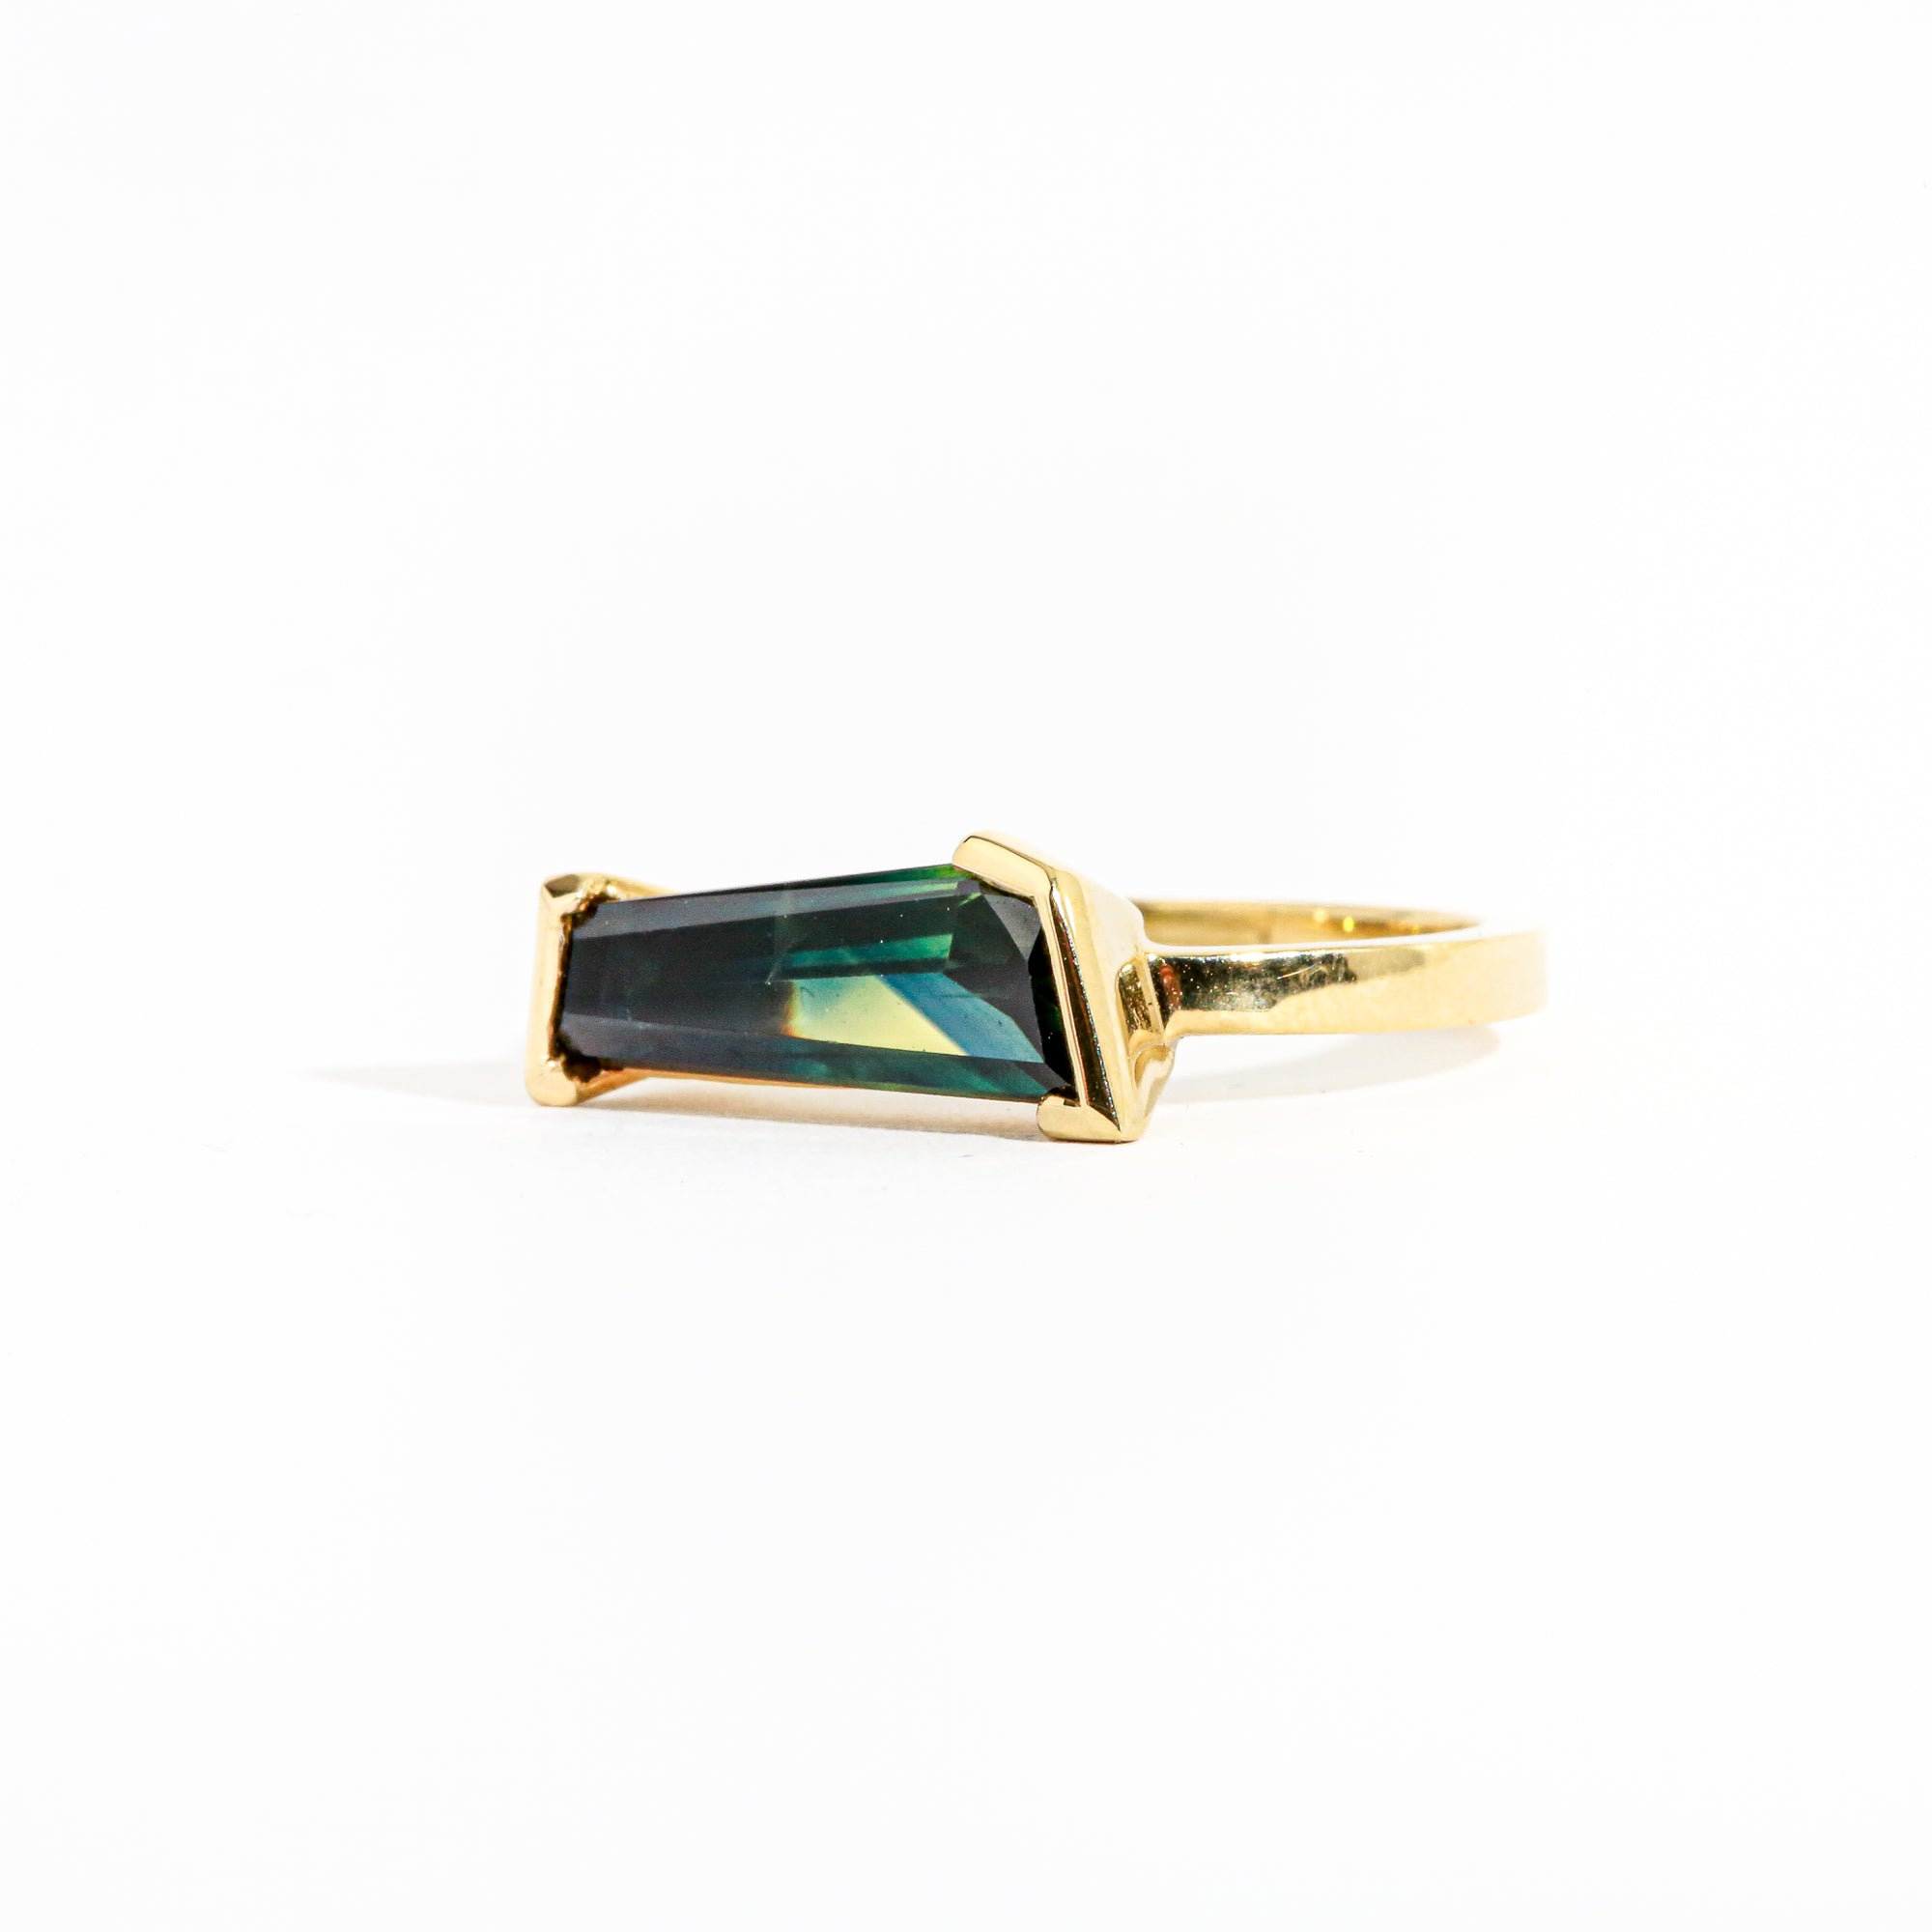 Freeform Cut Ethically Sourced Australian Sapphire Ring in 18ct Yellow Gold